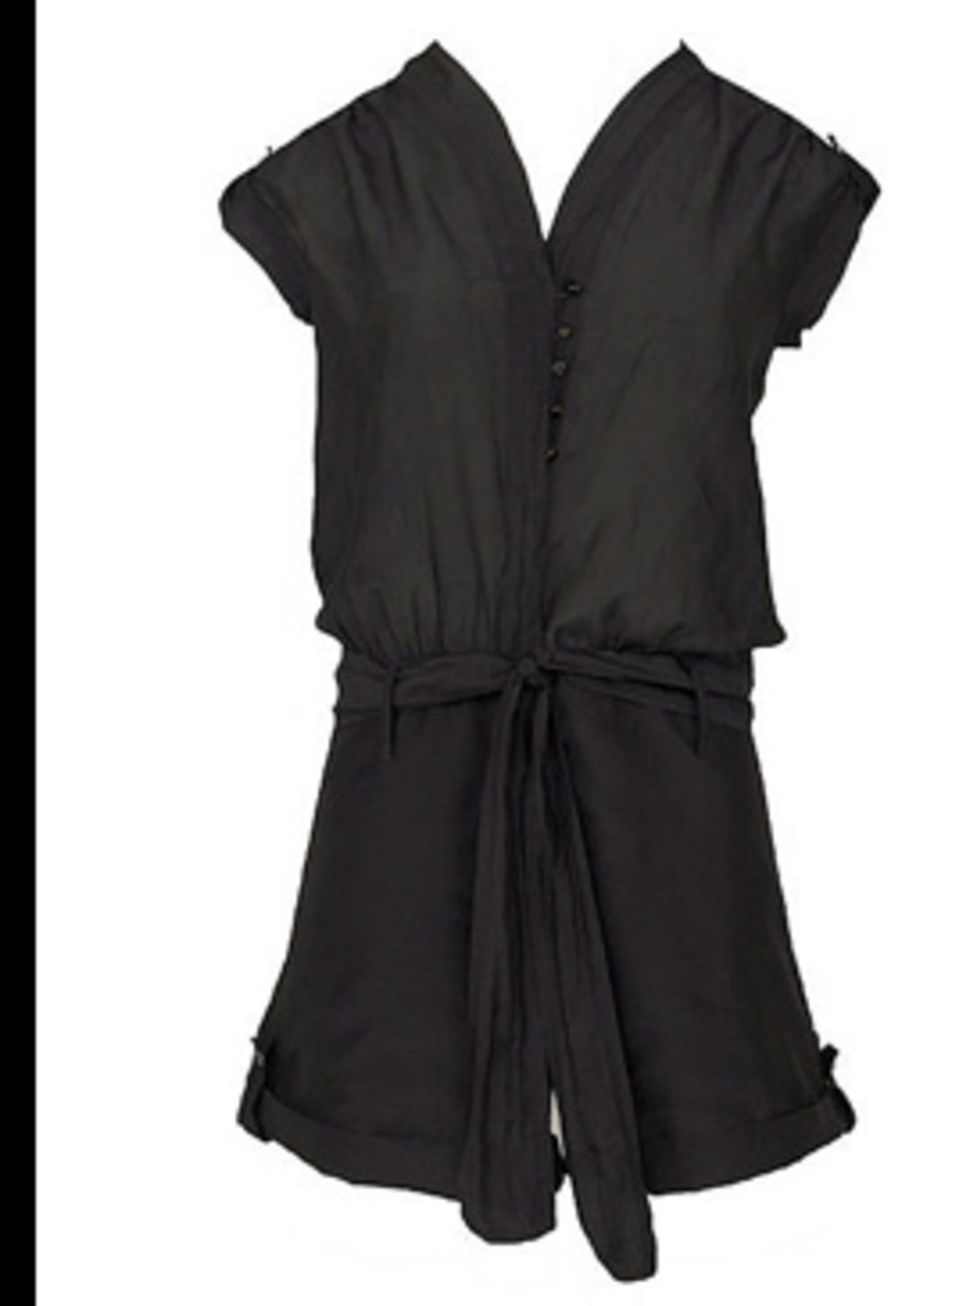 <p>Playsuit, £95.23 by Young Fabulous and Broke at <a href="http://www.bunnyhug.co.uk/fashionshop/gbu0-prodshow/Young_Fabulous_and_Broke_Silk_Cotton_Mix_Black_Playsuit.html">Bunnyhug</a></p>